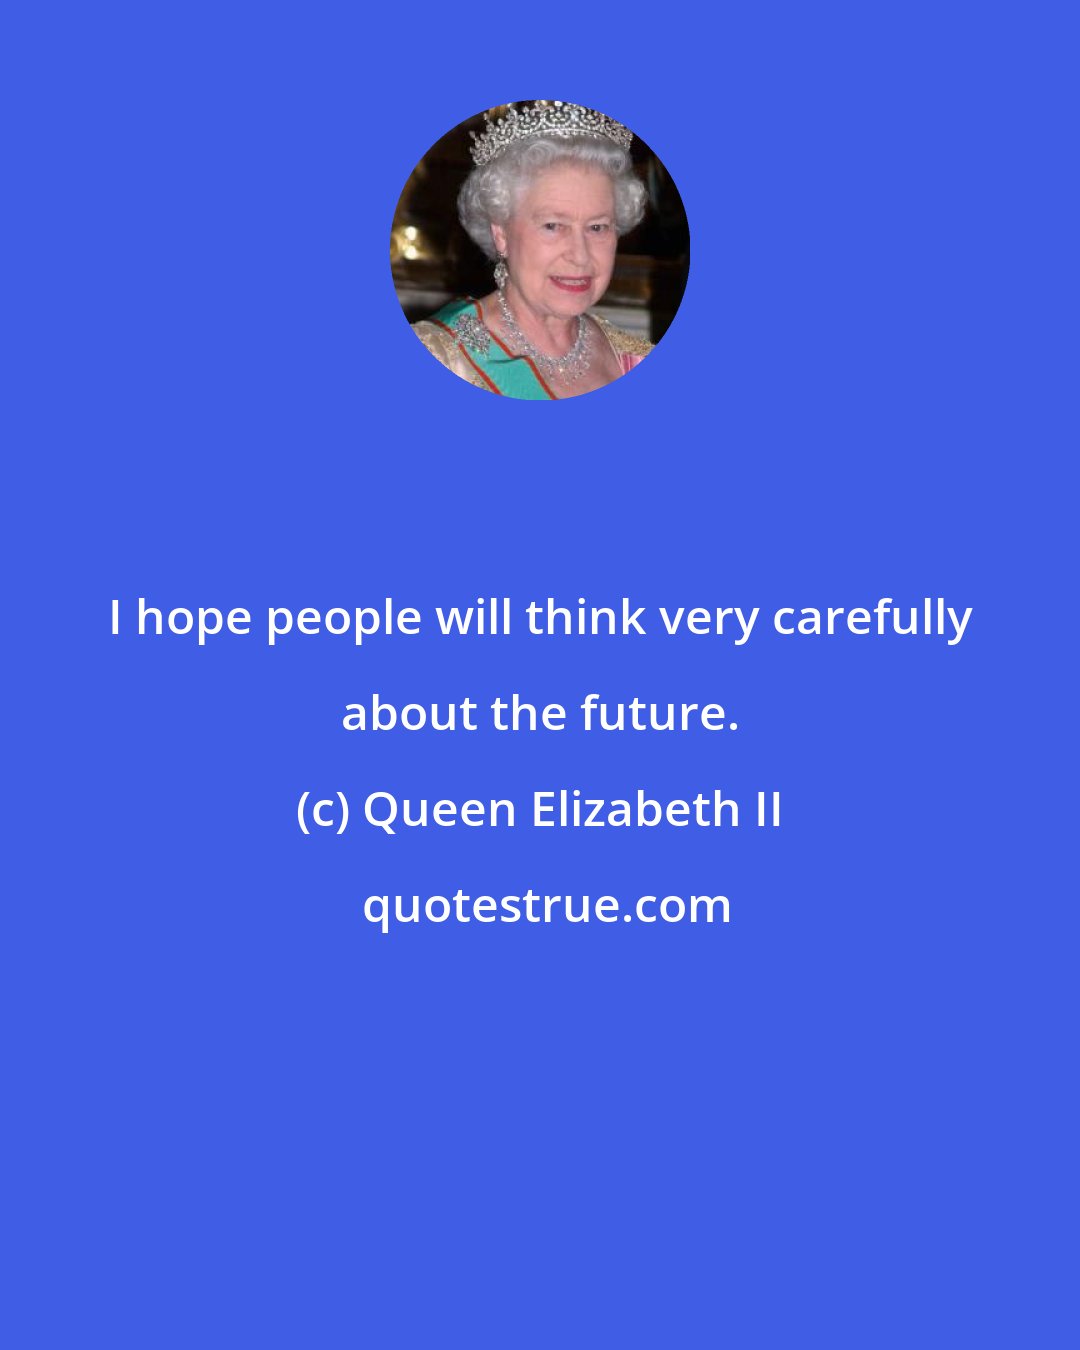 Queen Elizabeth II: I hope people will think very carefully about the future.